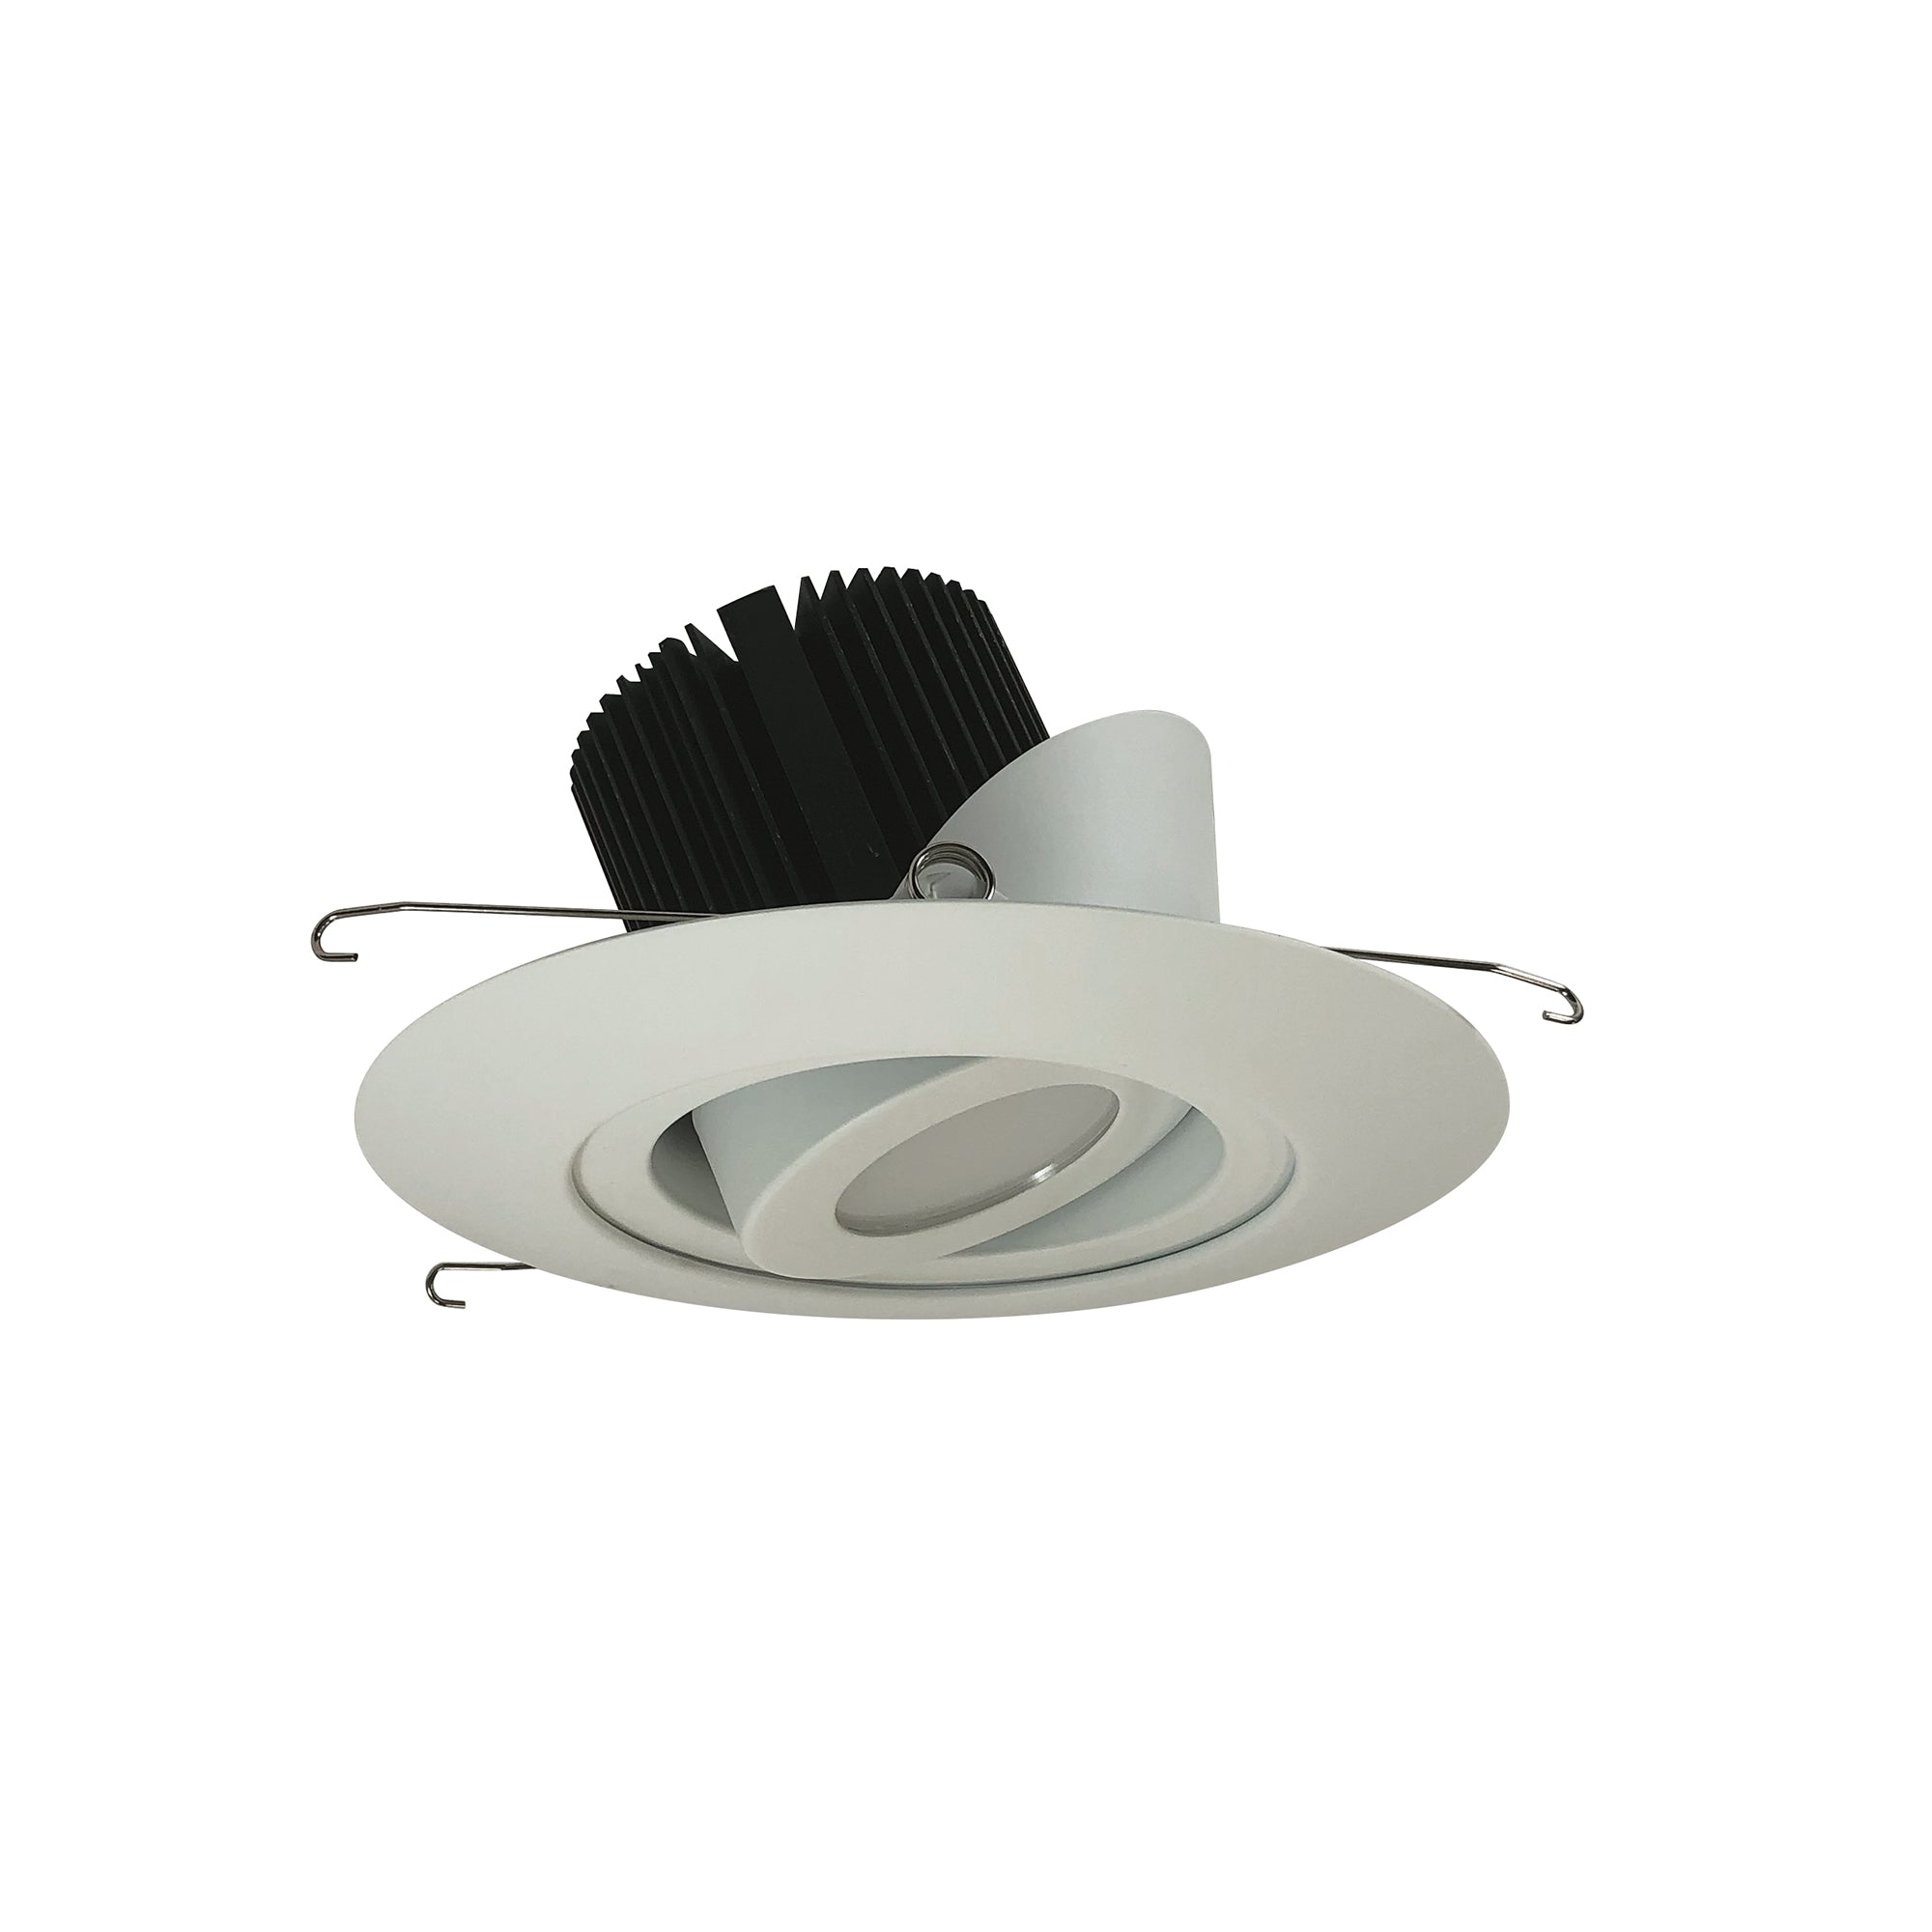 Nora Lighting NRM2-614L2540FWW - Recessed - 6 Inch Marquise II Round Surface Adjustable Trim, Flood, 2500lm, 4000K, White (Not Compatible with NHRM2-625 Housings)